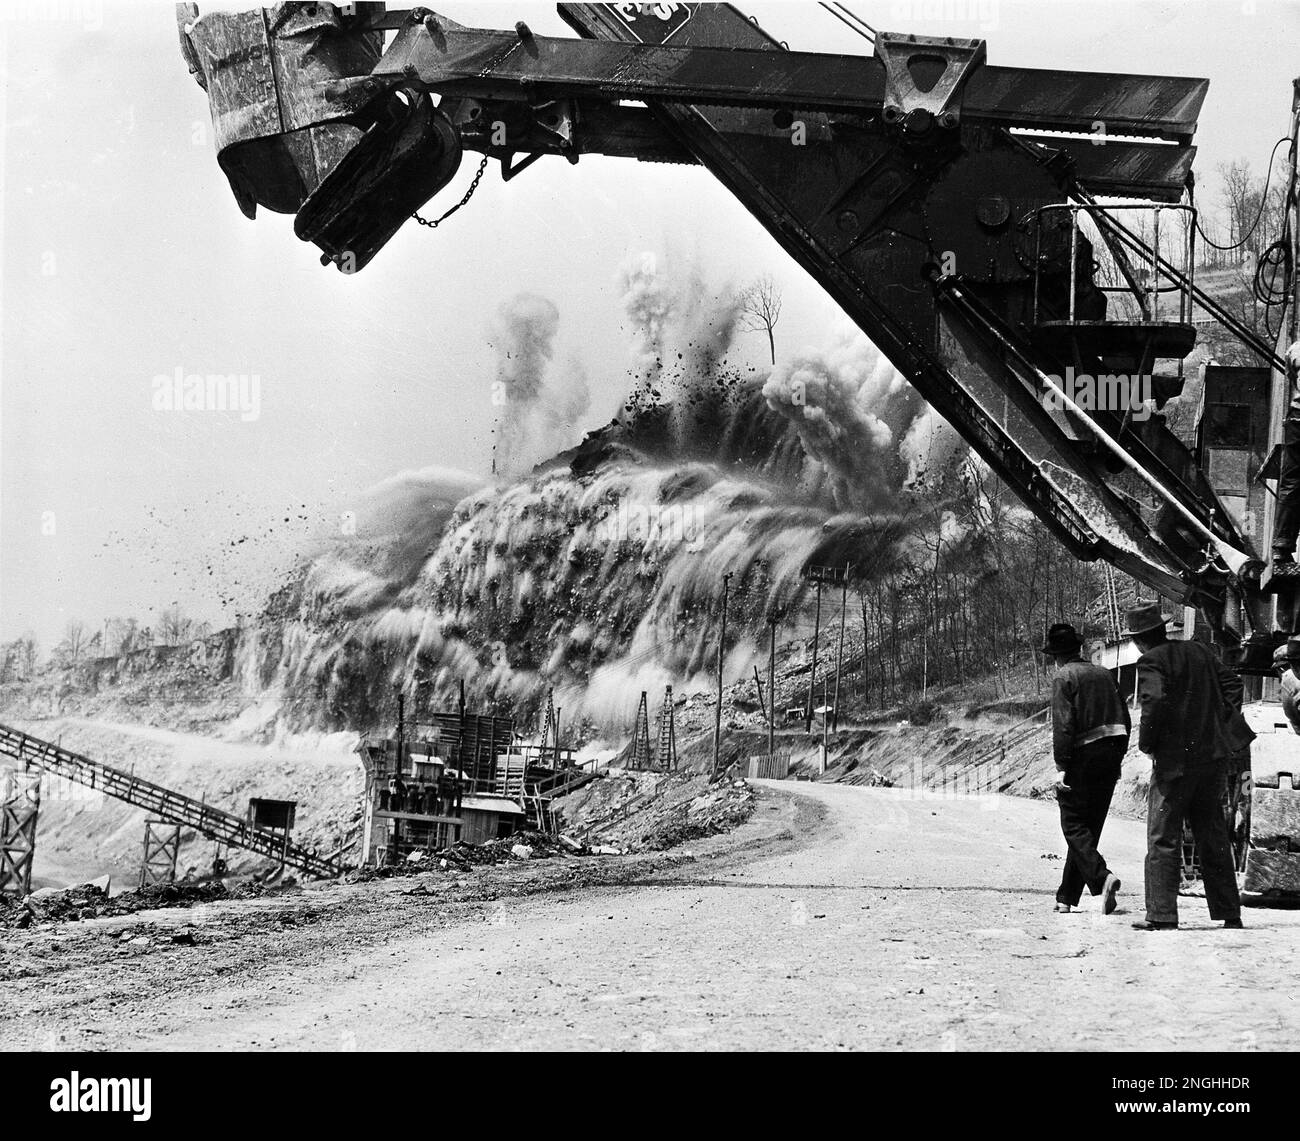 Nearly 125,000 pounds of explosives go off in a blast to slice of a half  million tons of limestone rock near Jefferson City, Tenn., March 22, 1941.  The limestone will be used